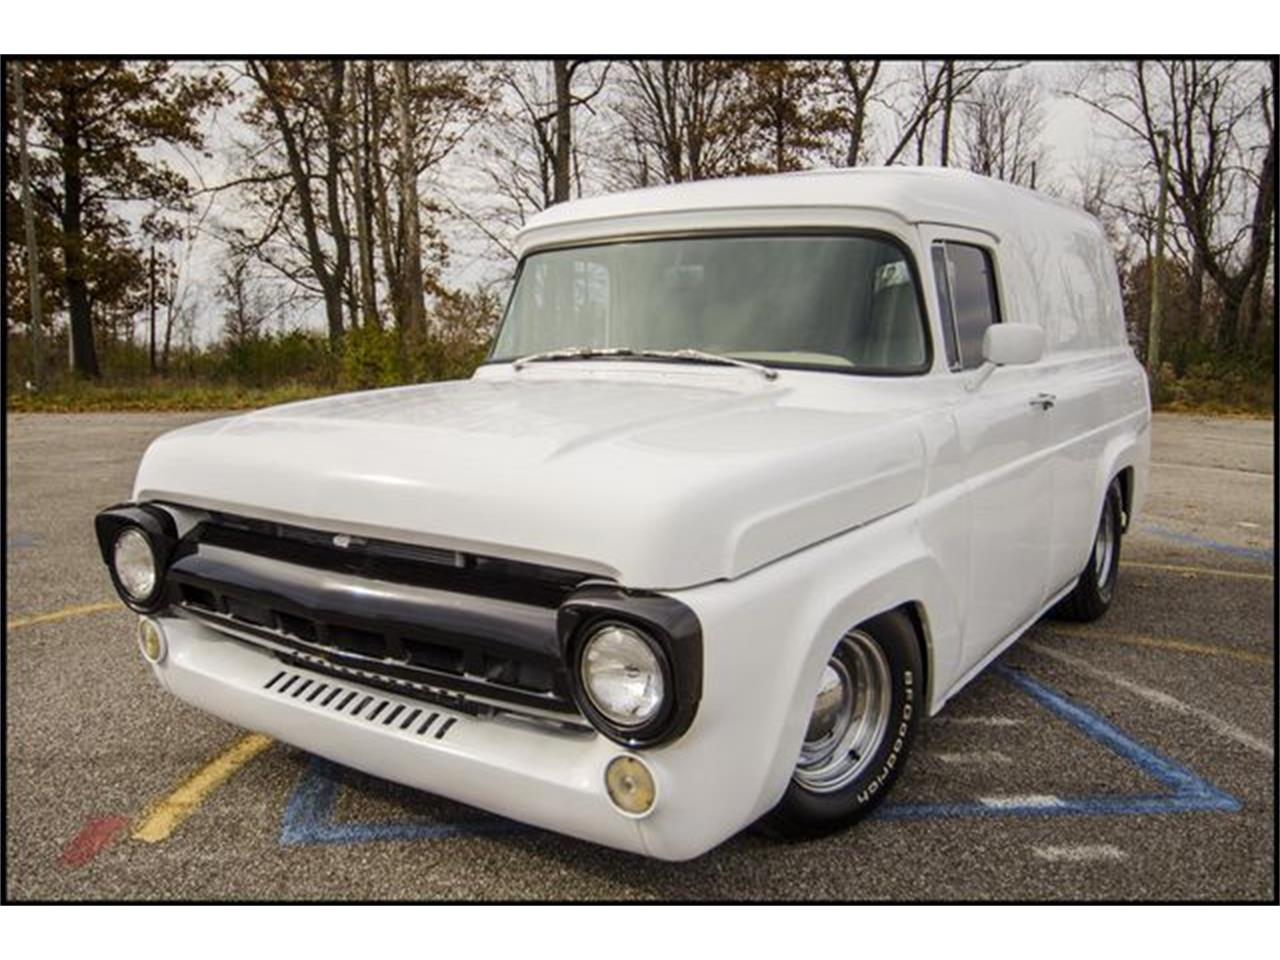 1957 Ford Panel Truck for Sale | 0 | CC-1169879